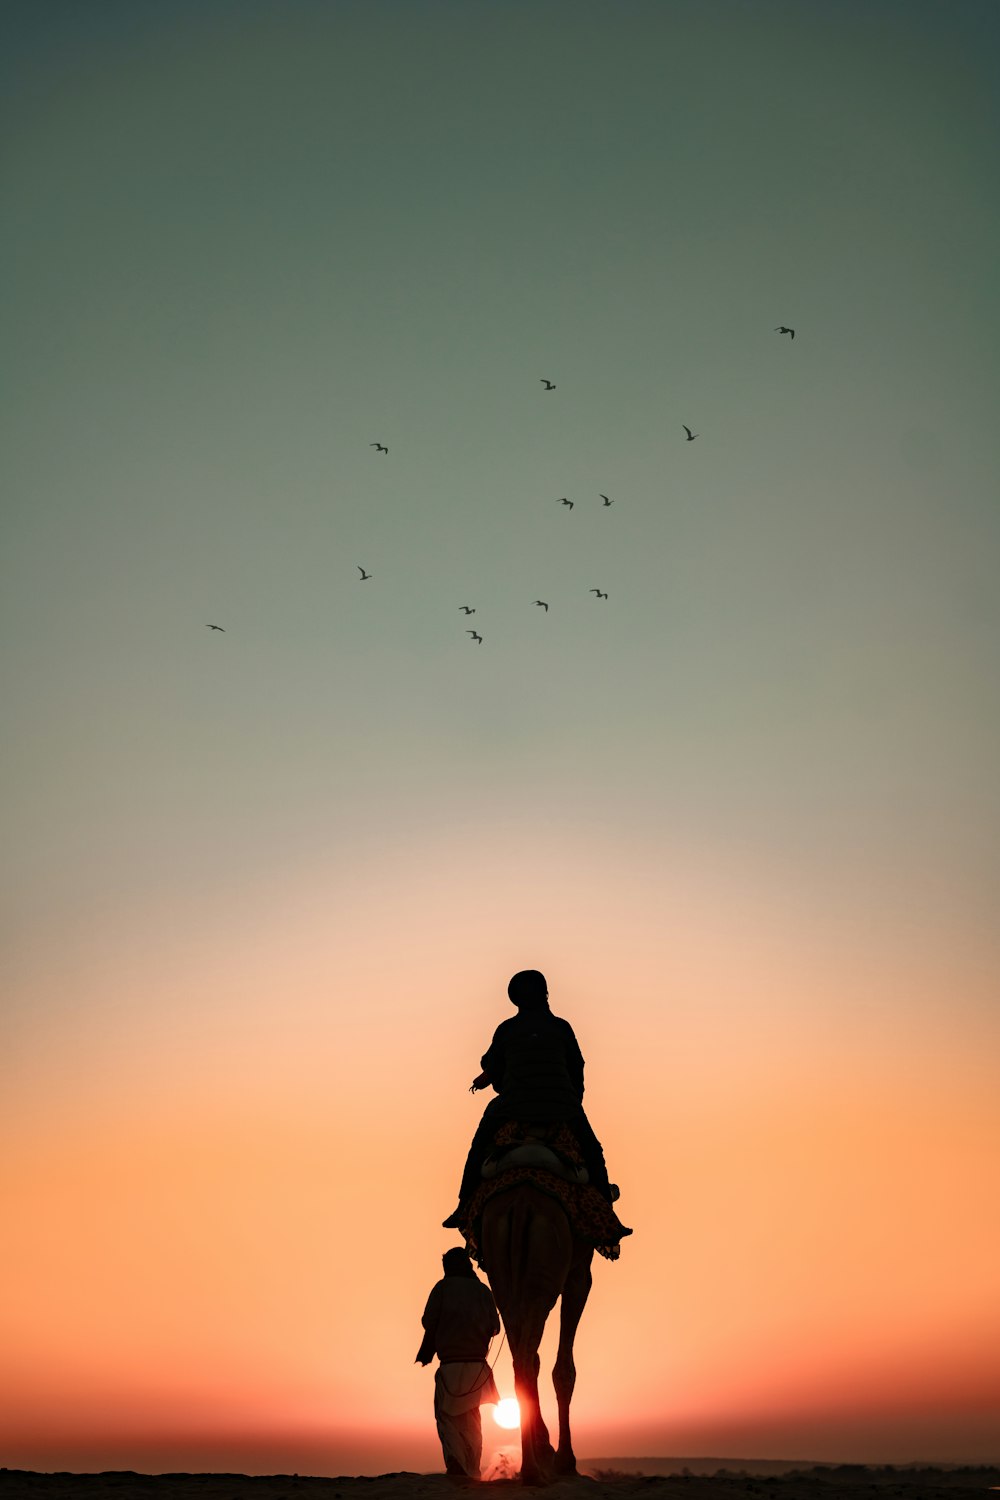 a person riding a horse at sunset with birds in the sky